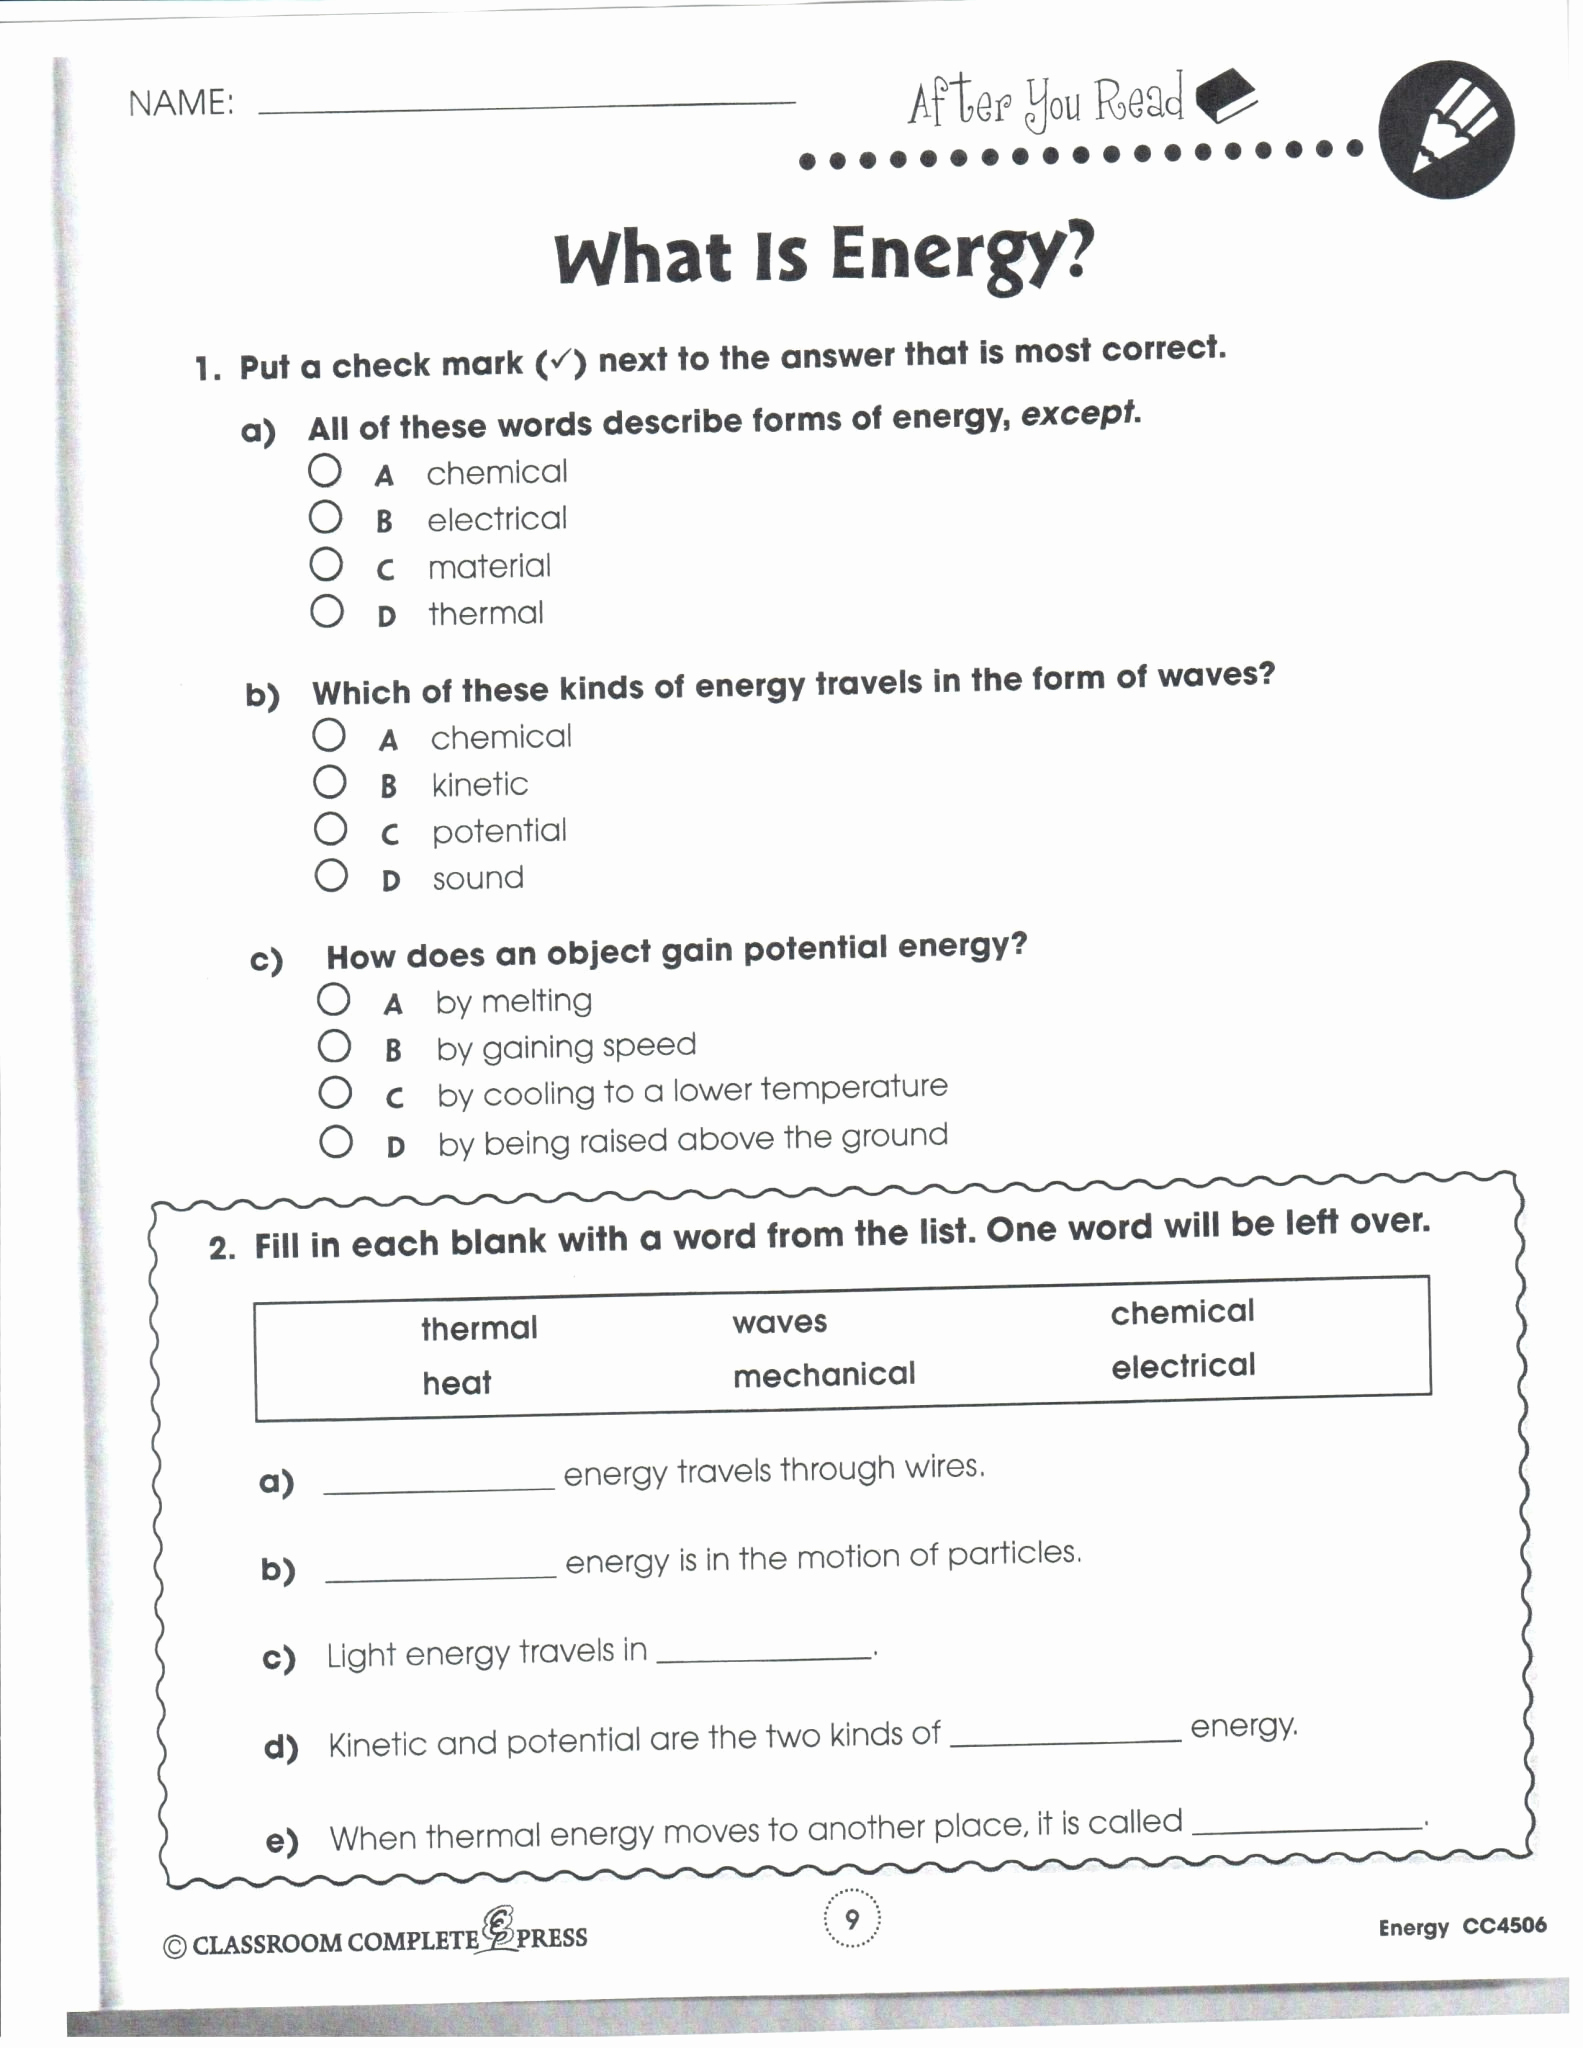 Science Worksheets for 5th Grade Lovely 5th Grade Science Worksheets with Answer Key — Excelguider